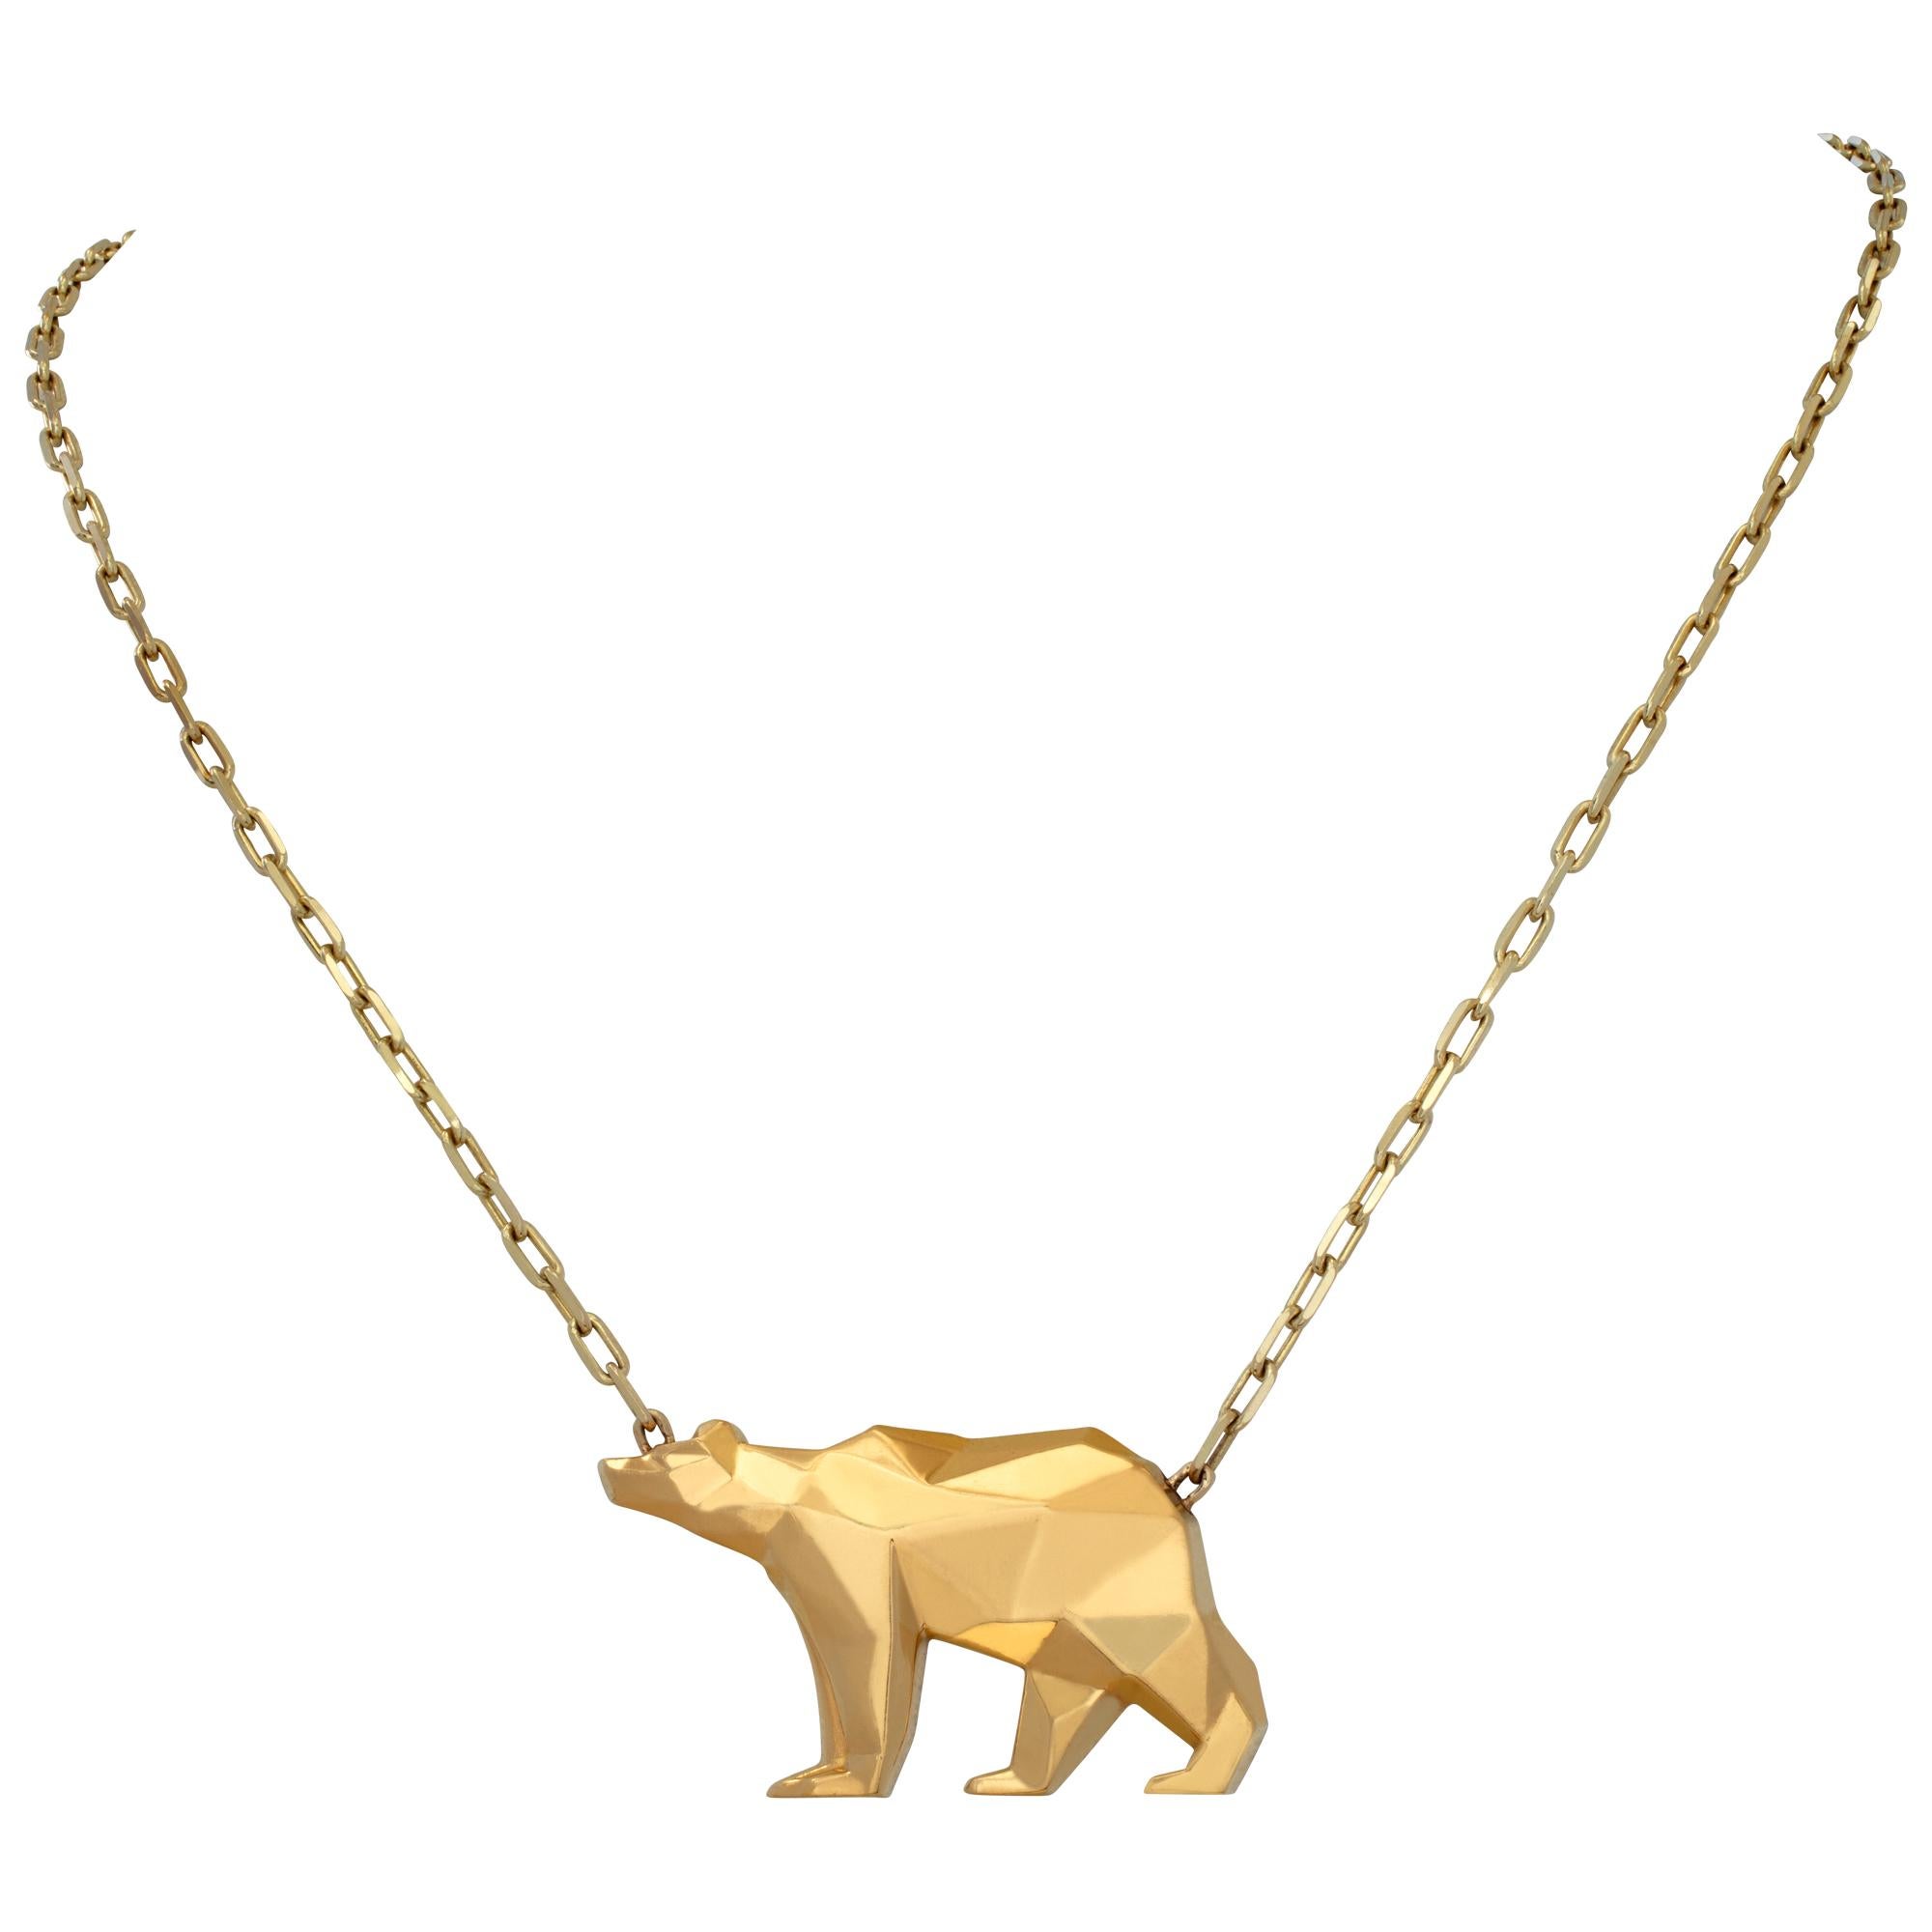 Bear pendant in 24k gold. Contains almost 1 oz of pure California .999 gold with 18k yellow gold chain. Limited edition No. 002. Measures 18 inches.
